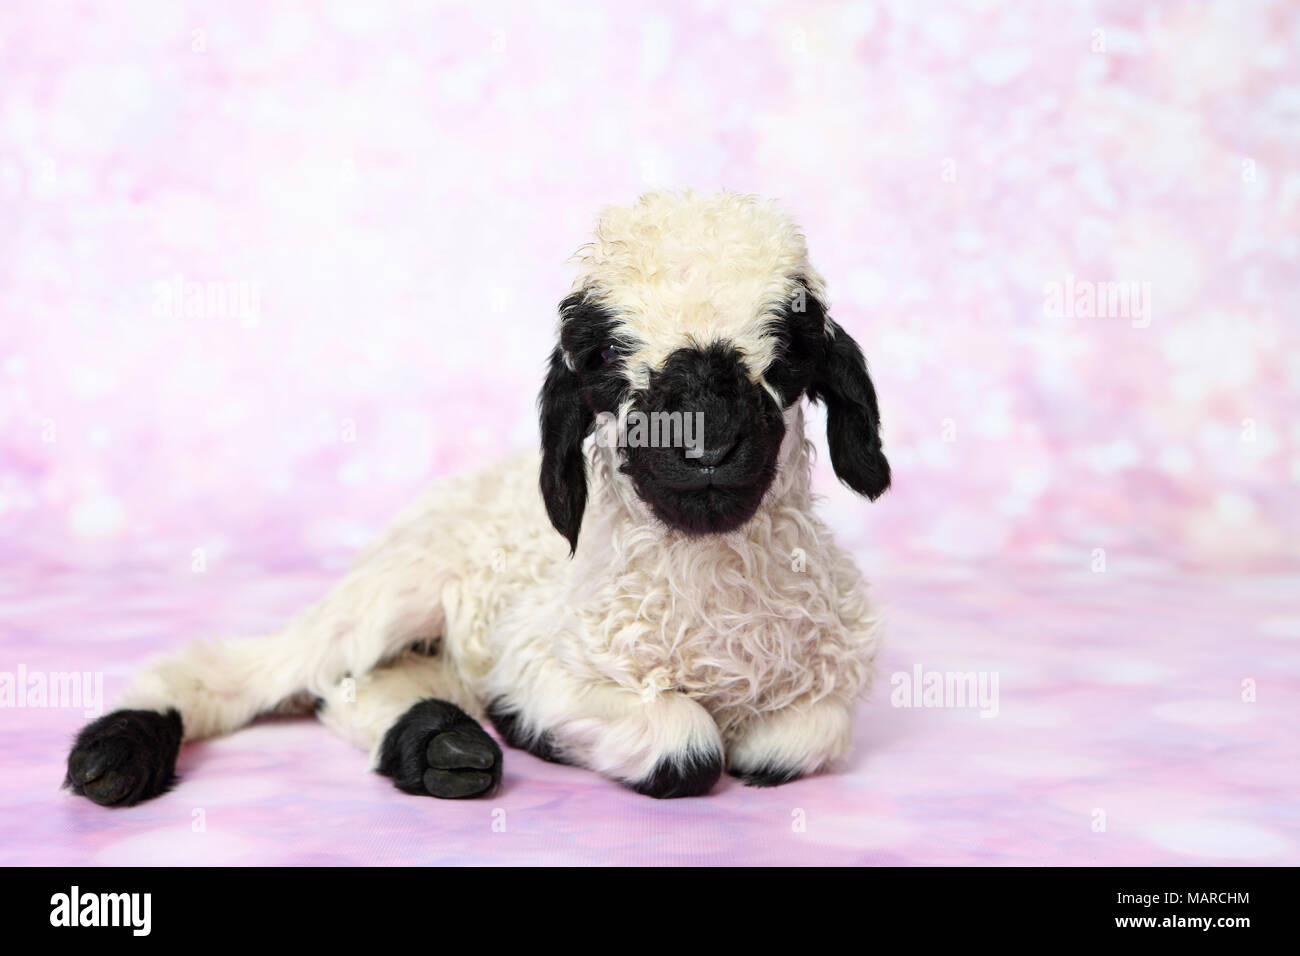 Valais Blacknose Sheep. Lamb (5 days old) lying. Studio picture against a pink background. Germany Stock Photo